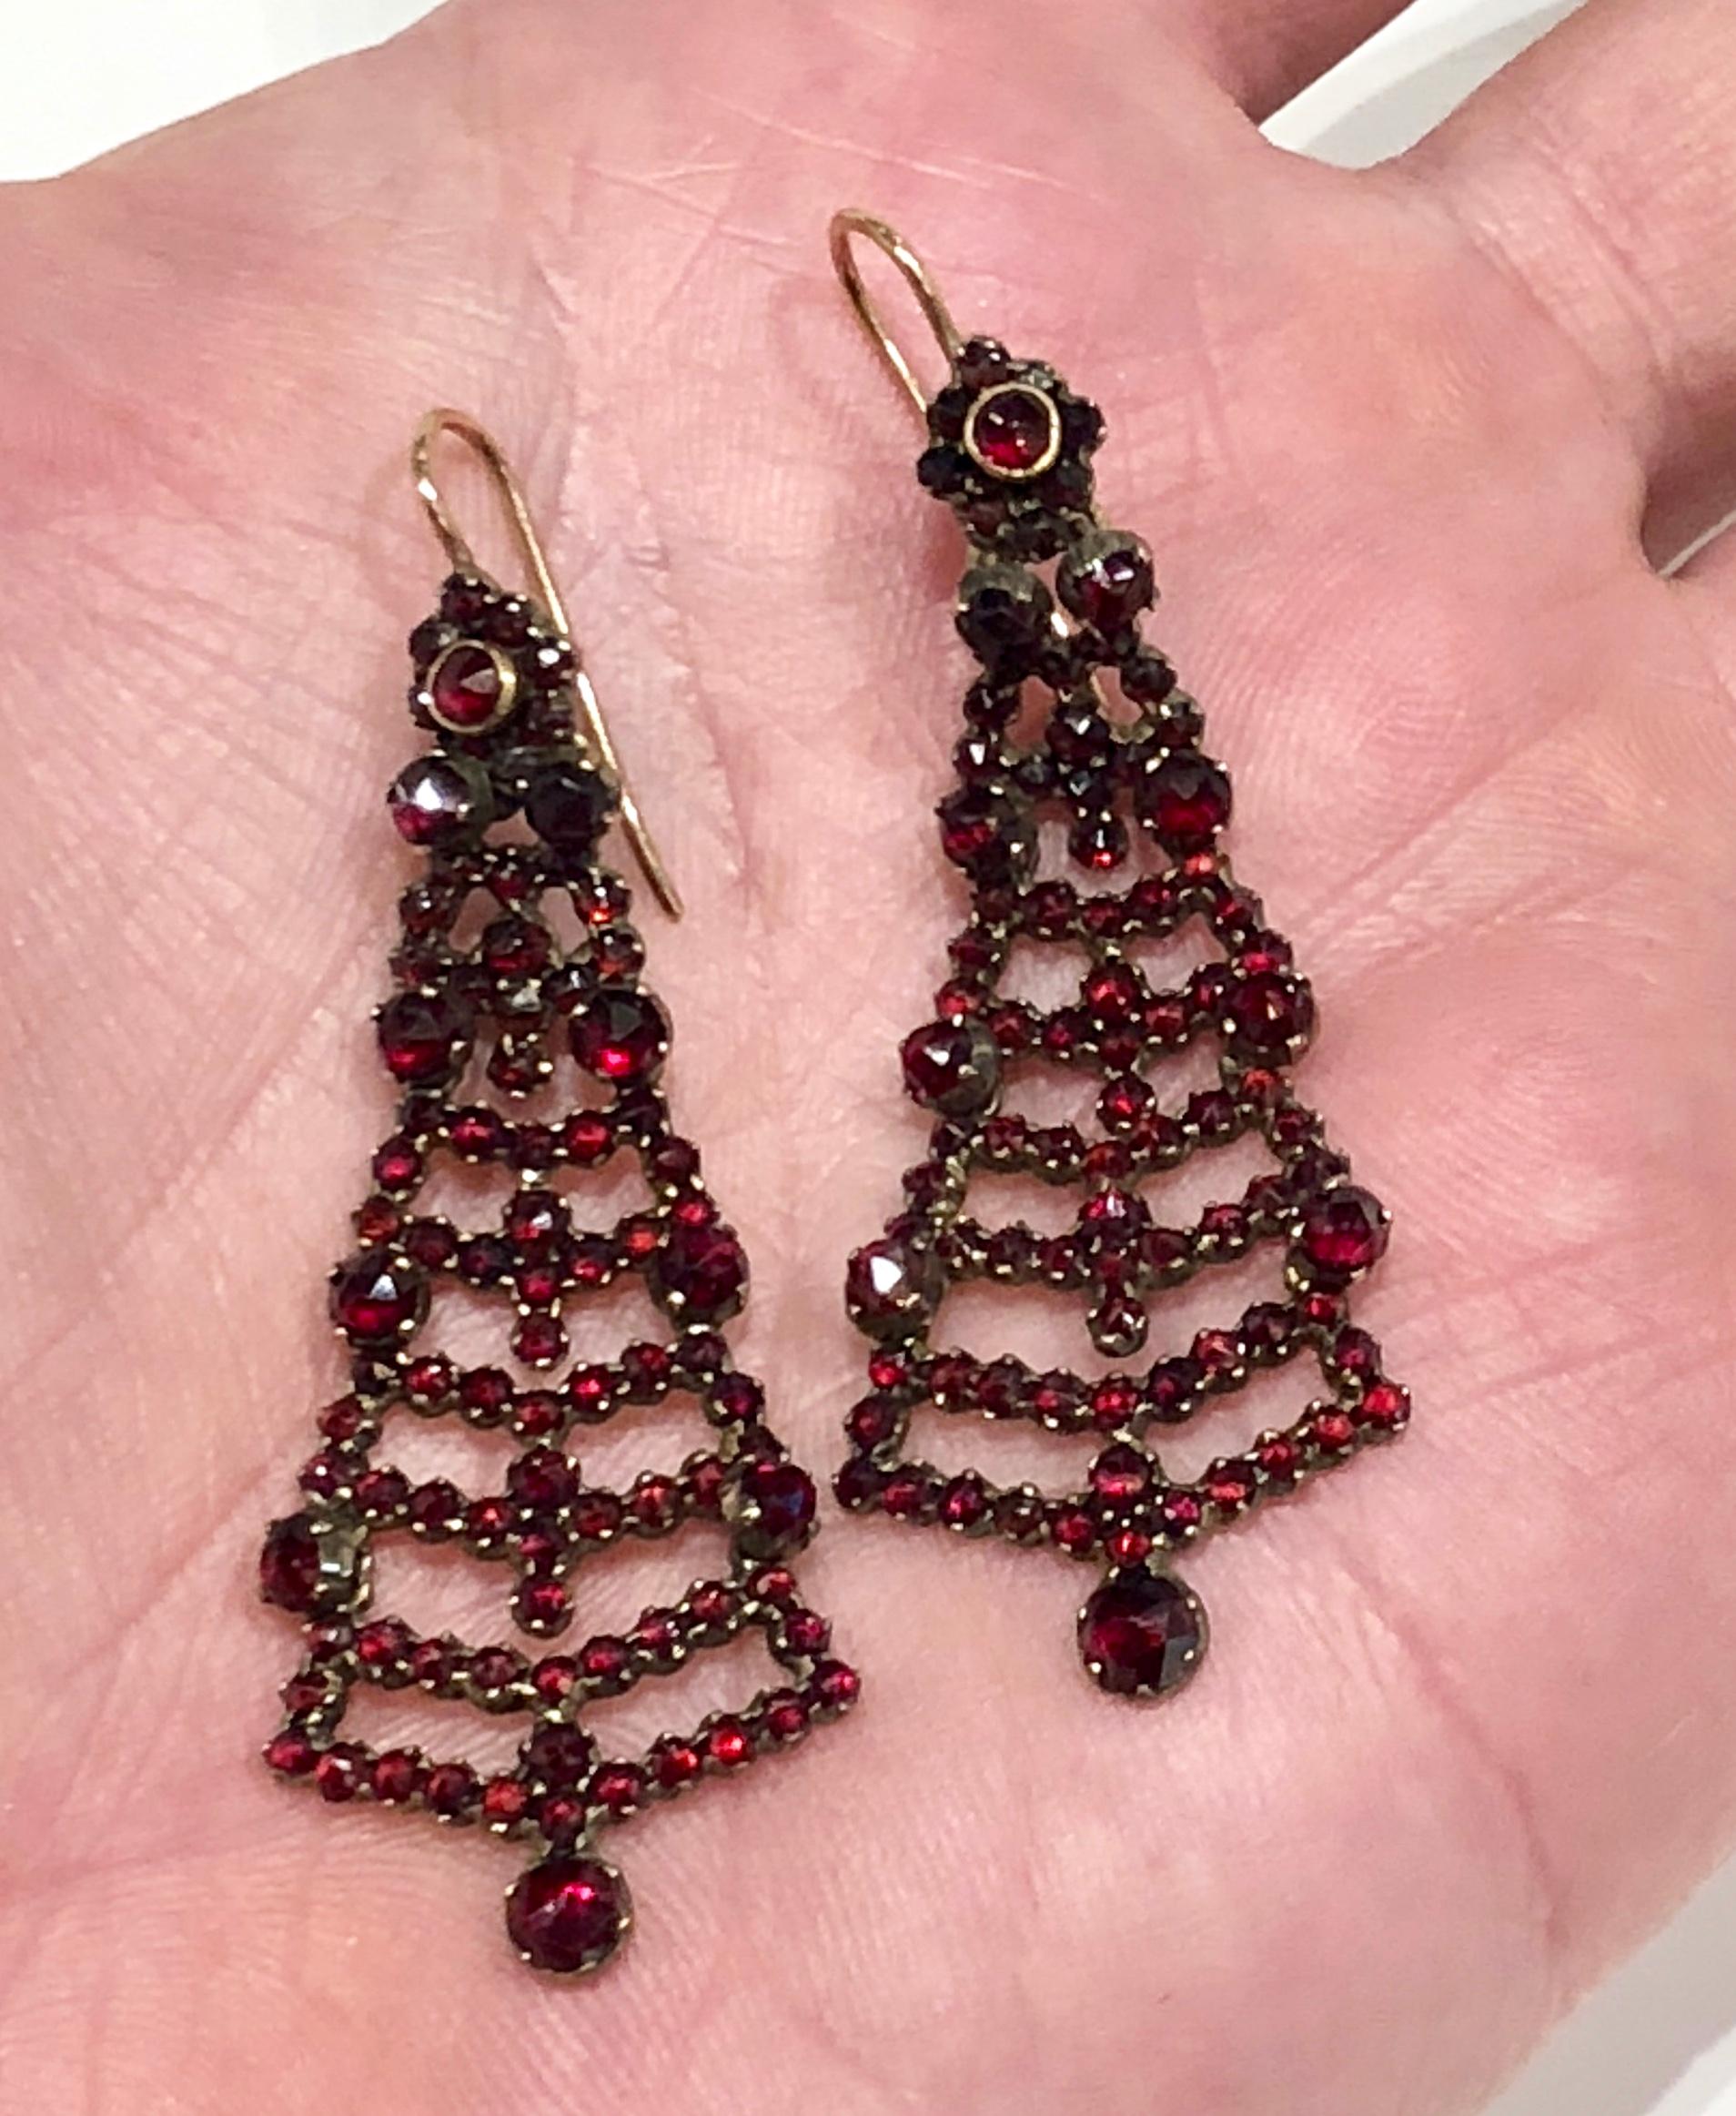 Set in garnet gold with 9k wires , Victorian earrings with tiered chandelier style. Deep red rose cut garnets covering the entire face of earring front.